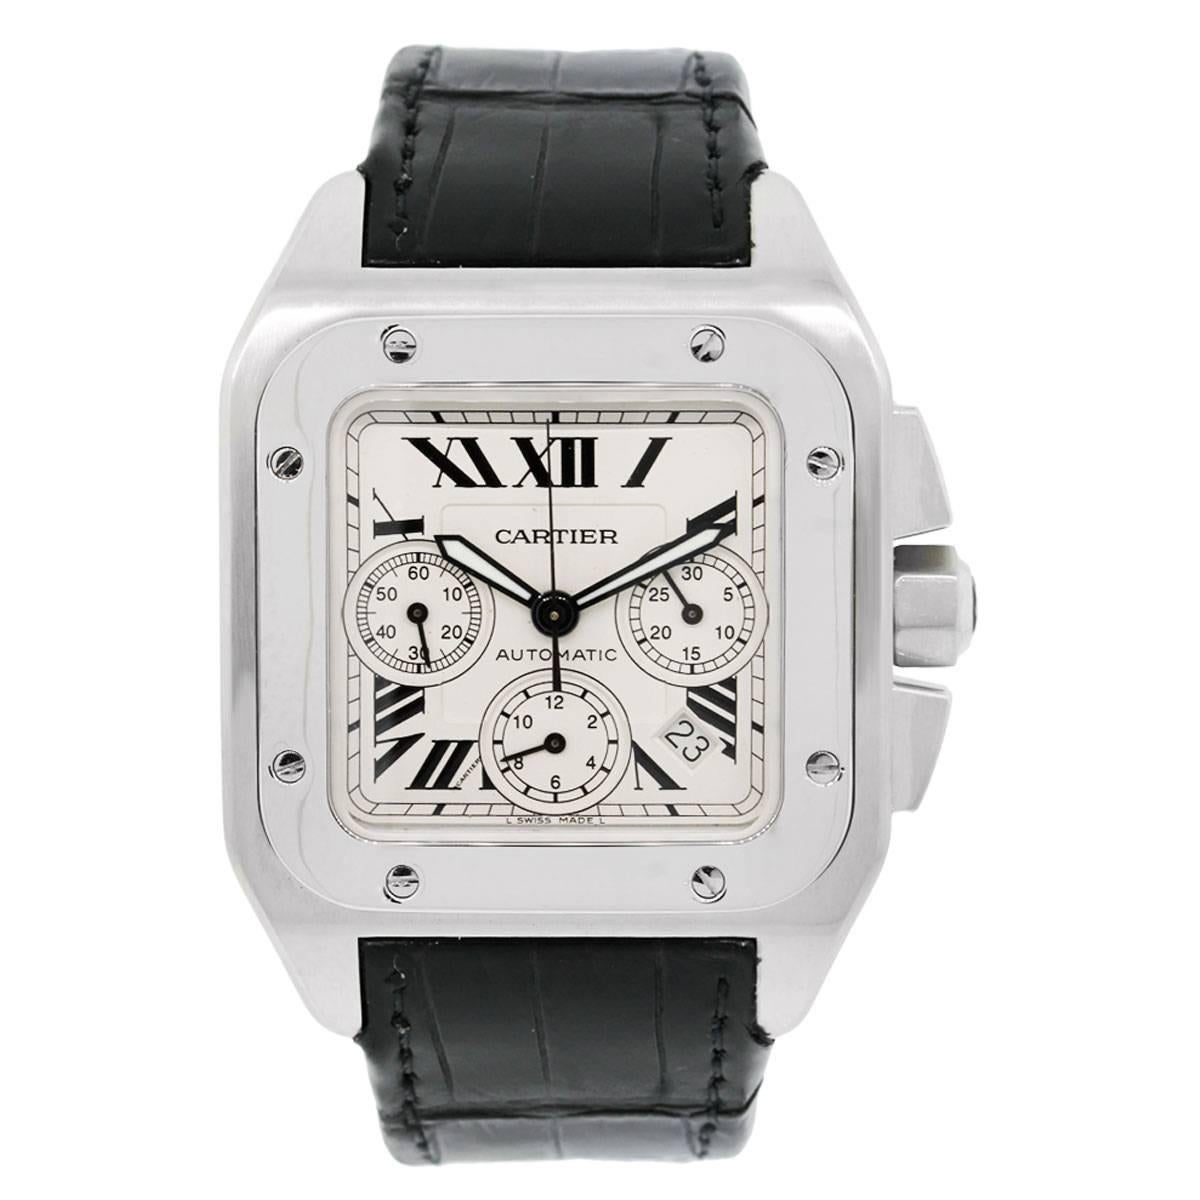 Brand: Cartier
Model: Santos 100 XL
Case Material: Stainless steel
Case Diameter: 42mm
Bezel: Stainless steel
Dial: White chronograph dial
Bracelet: Back leather
Size: Will fit a 6.25